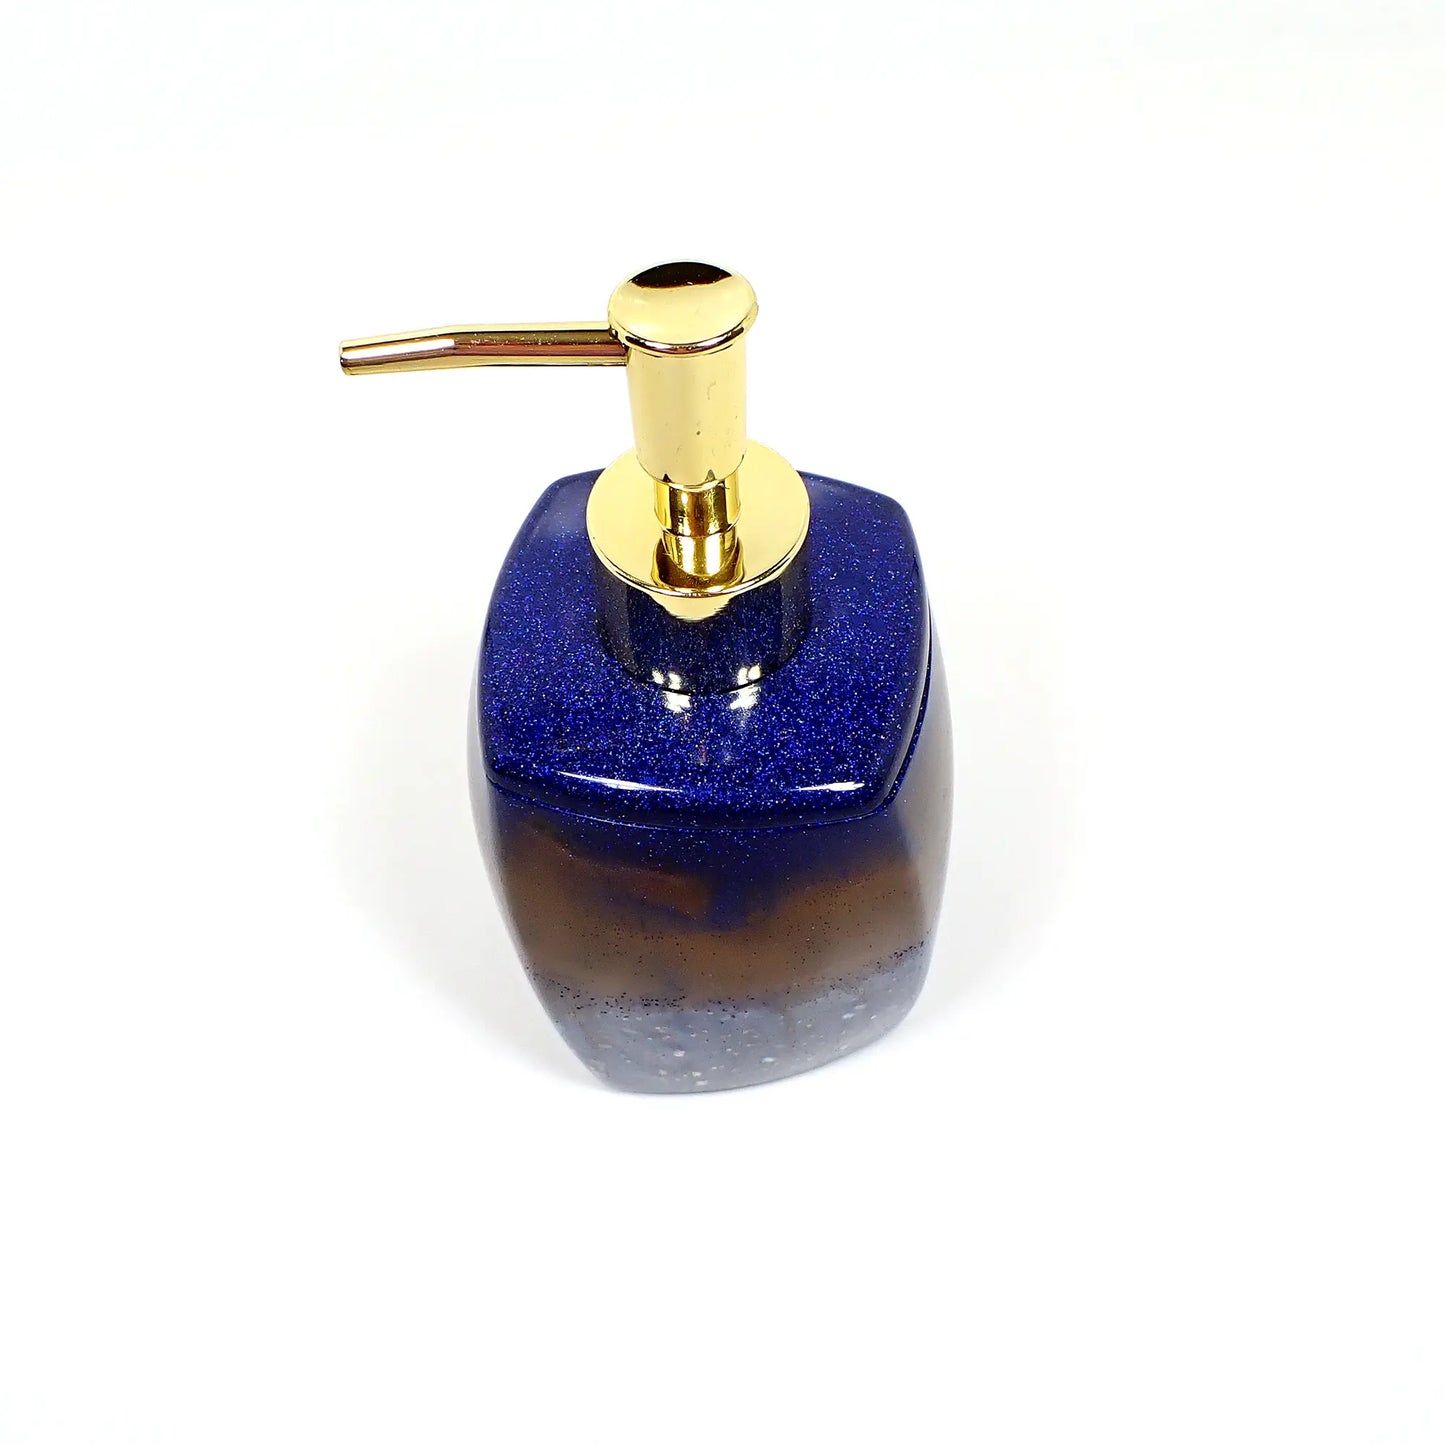 Angled Square Handmade Pearly Blue and Brown Resin Soap Dispenser with Glitter